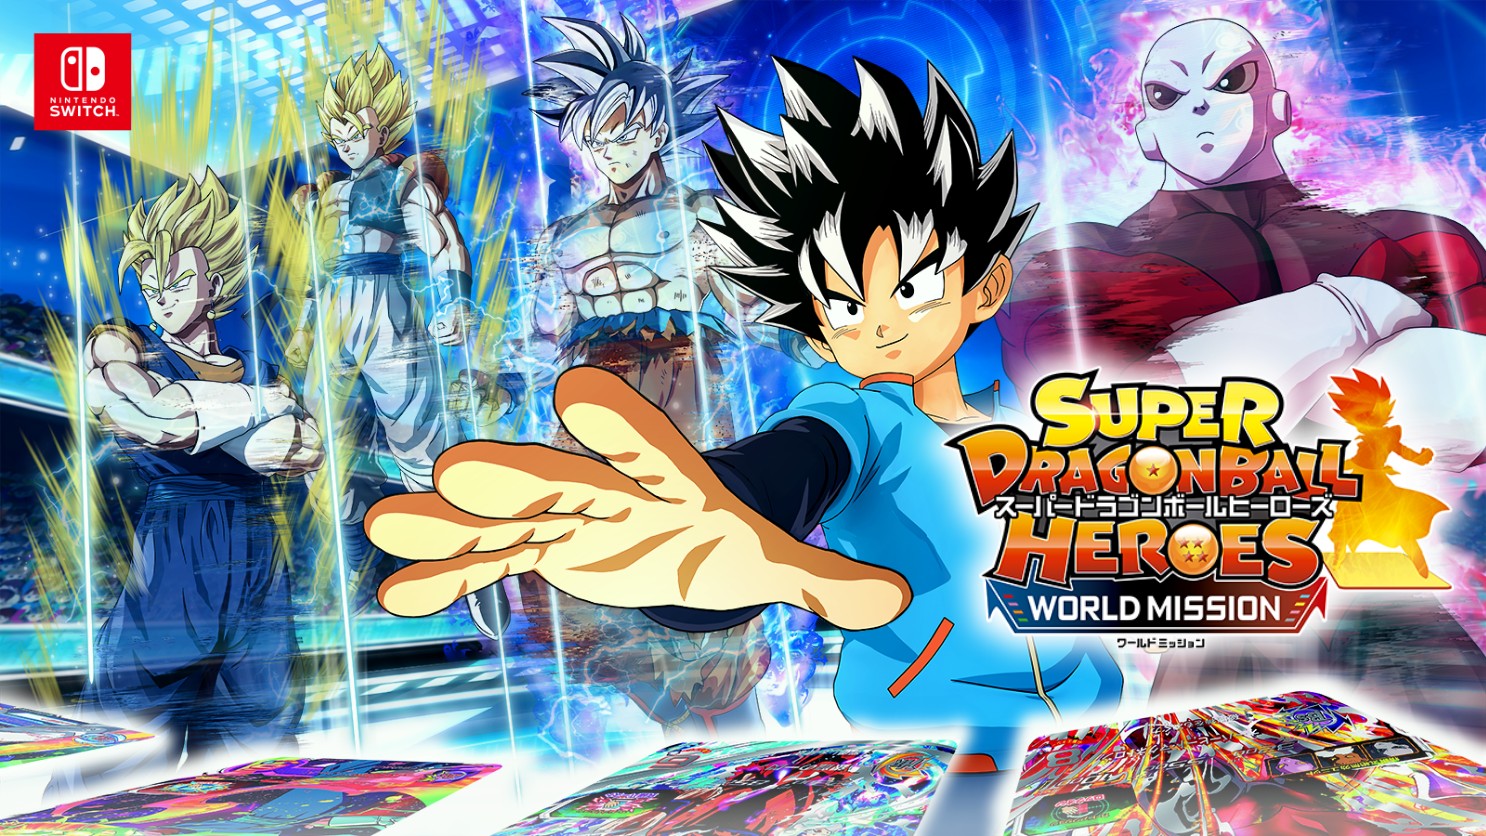 A New Villain Pops Up In Super Dragon Ball Heroes World Mission